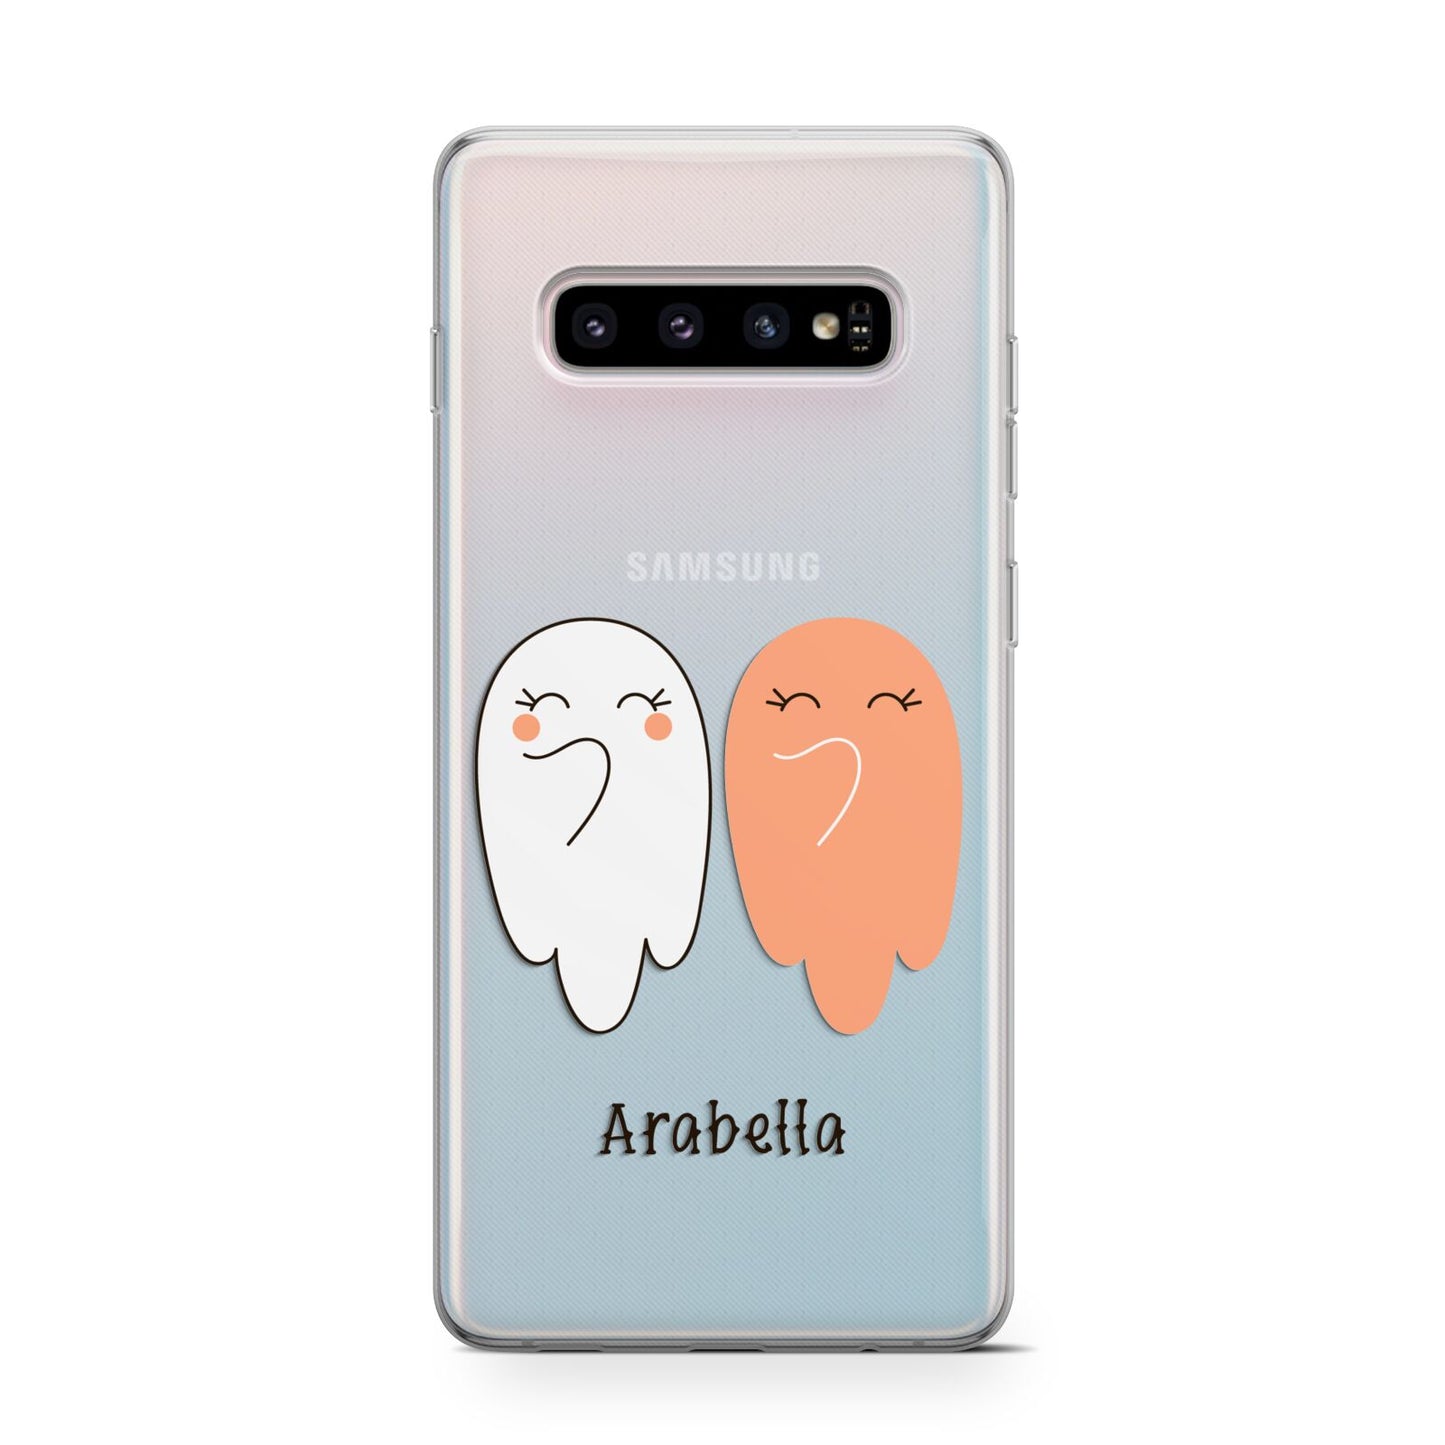 Two Ghosts Samsung Galaxy S10 Case